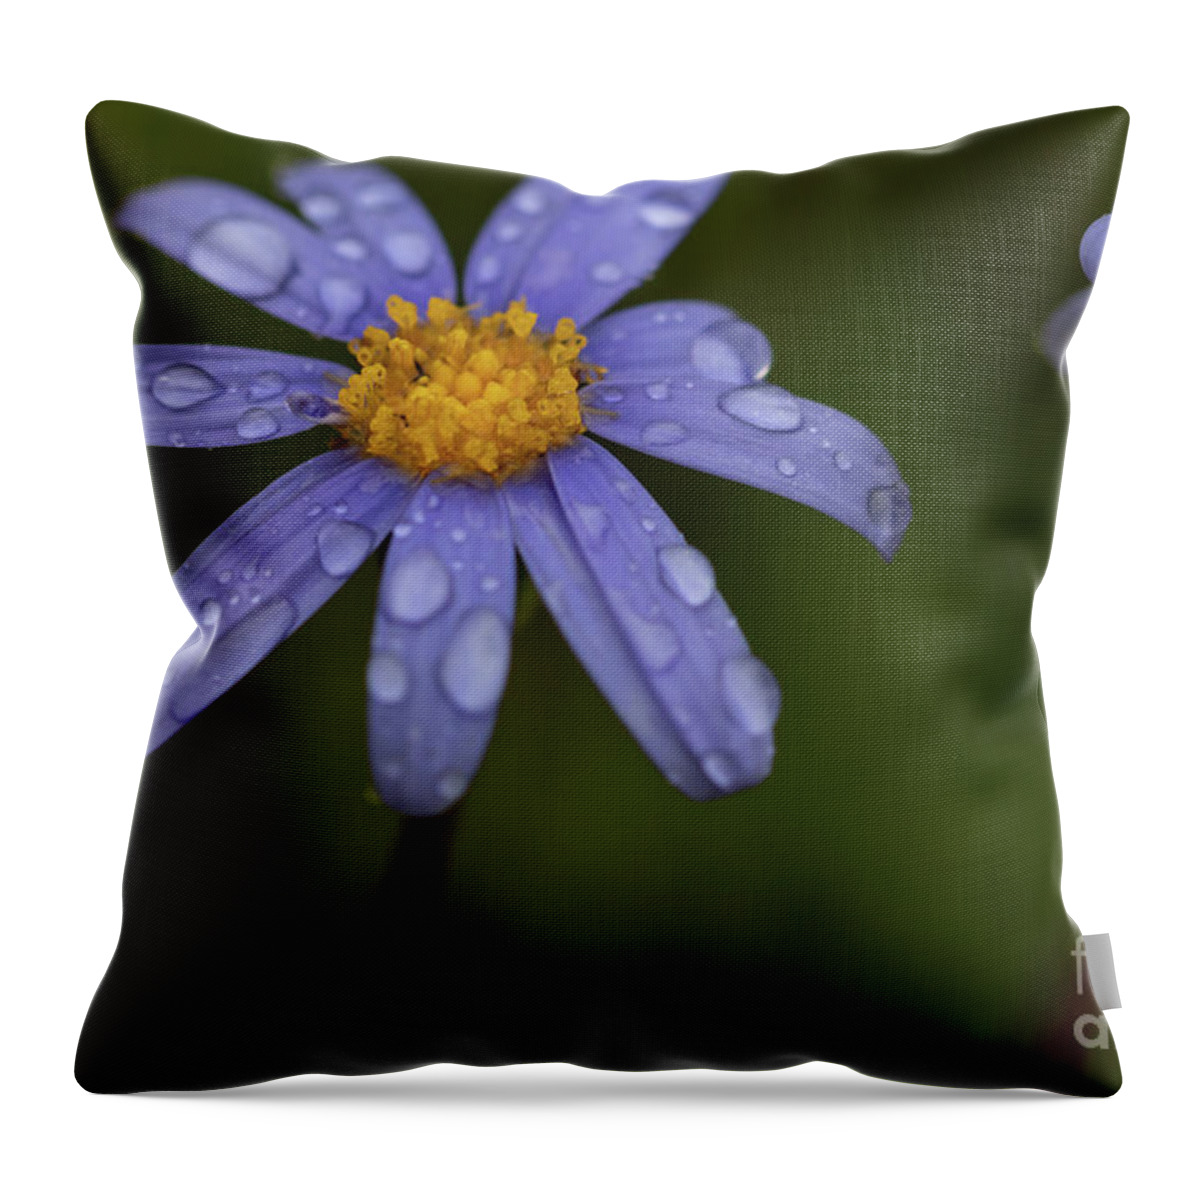 Felicia Aethiopica Throw Pillow featuring the photograph Felicia Aethiopica by Eva Lechner